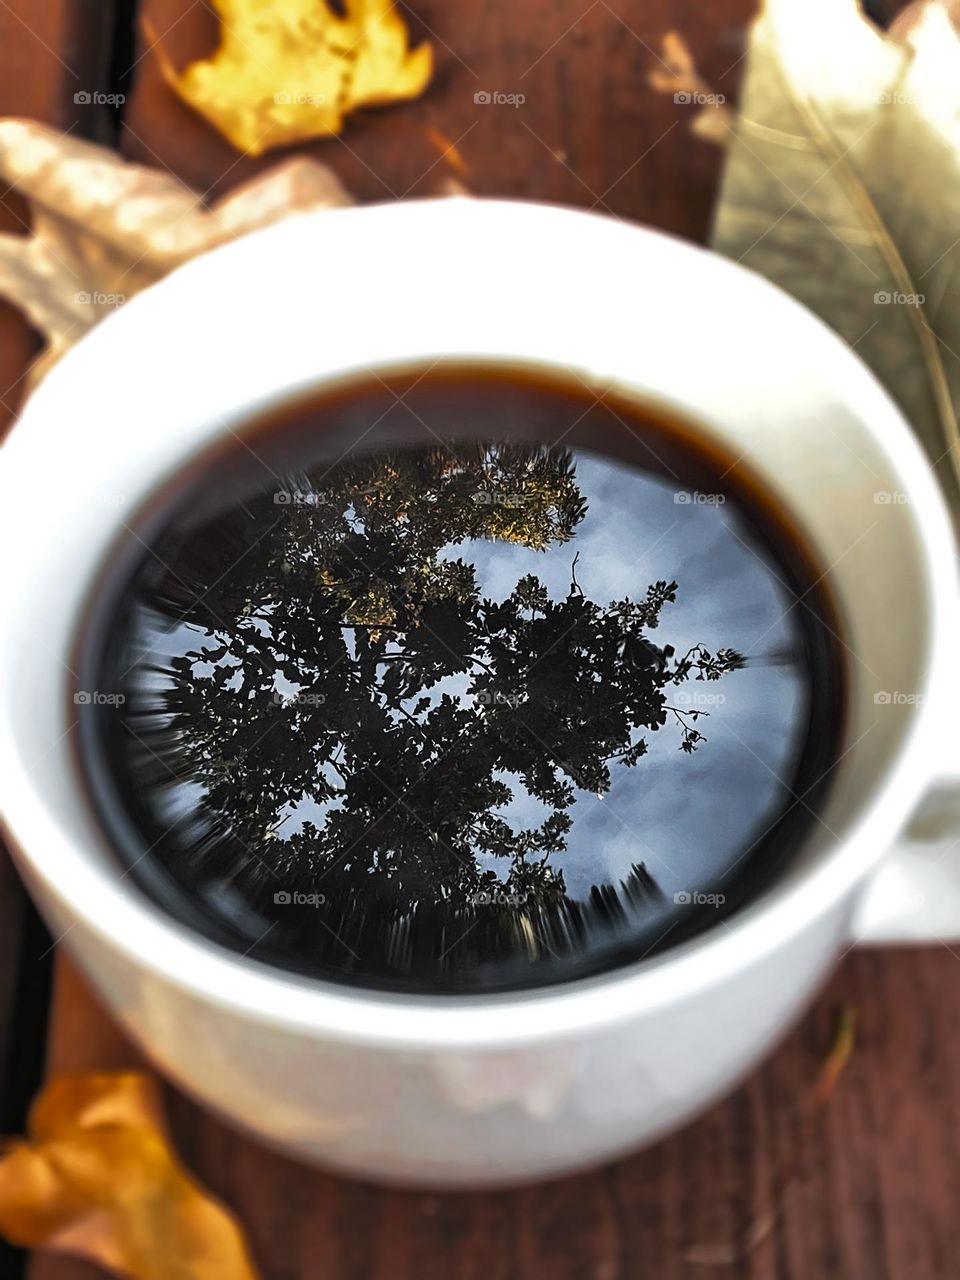 Phone photography amateur fall leaves autumn coffee cup reflection water liquid outdoors rustic nature tree deck wood outside Colors leafs